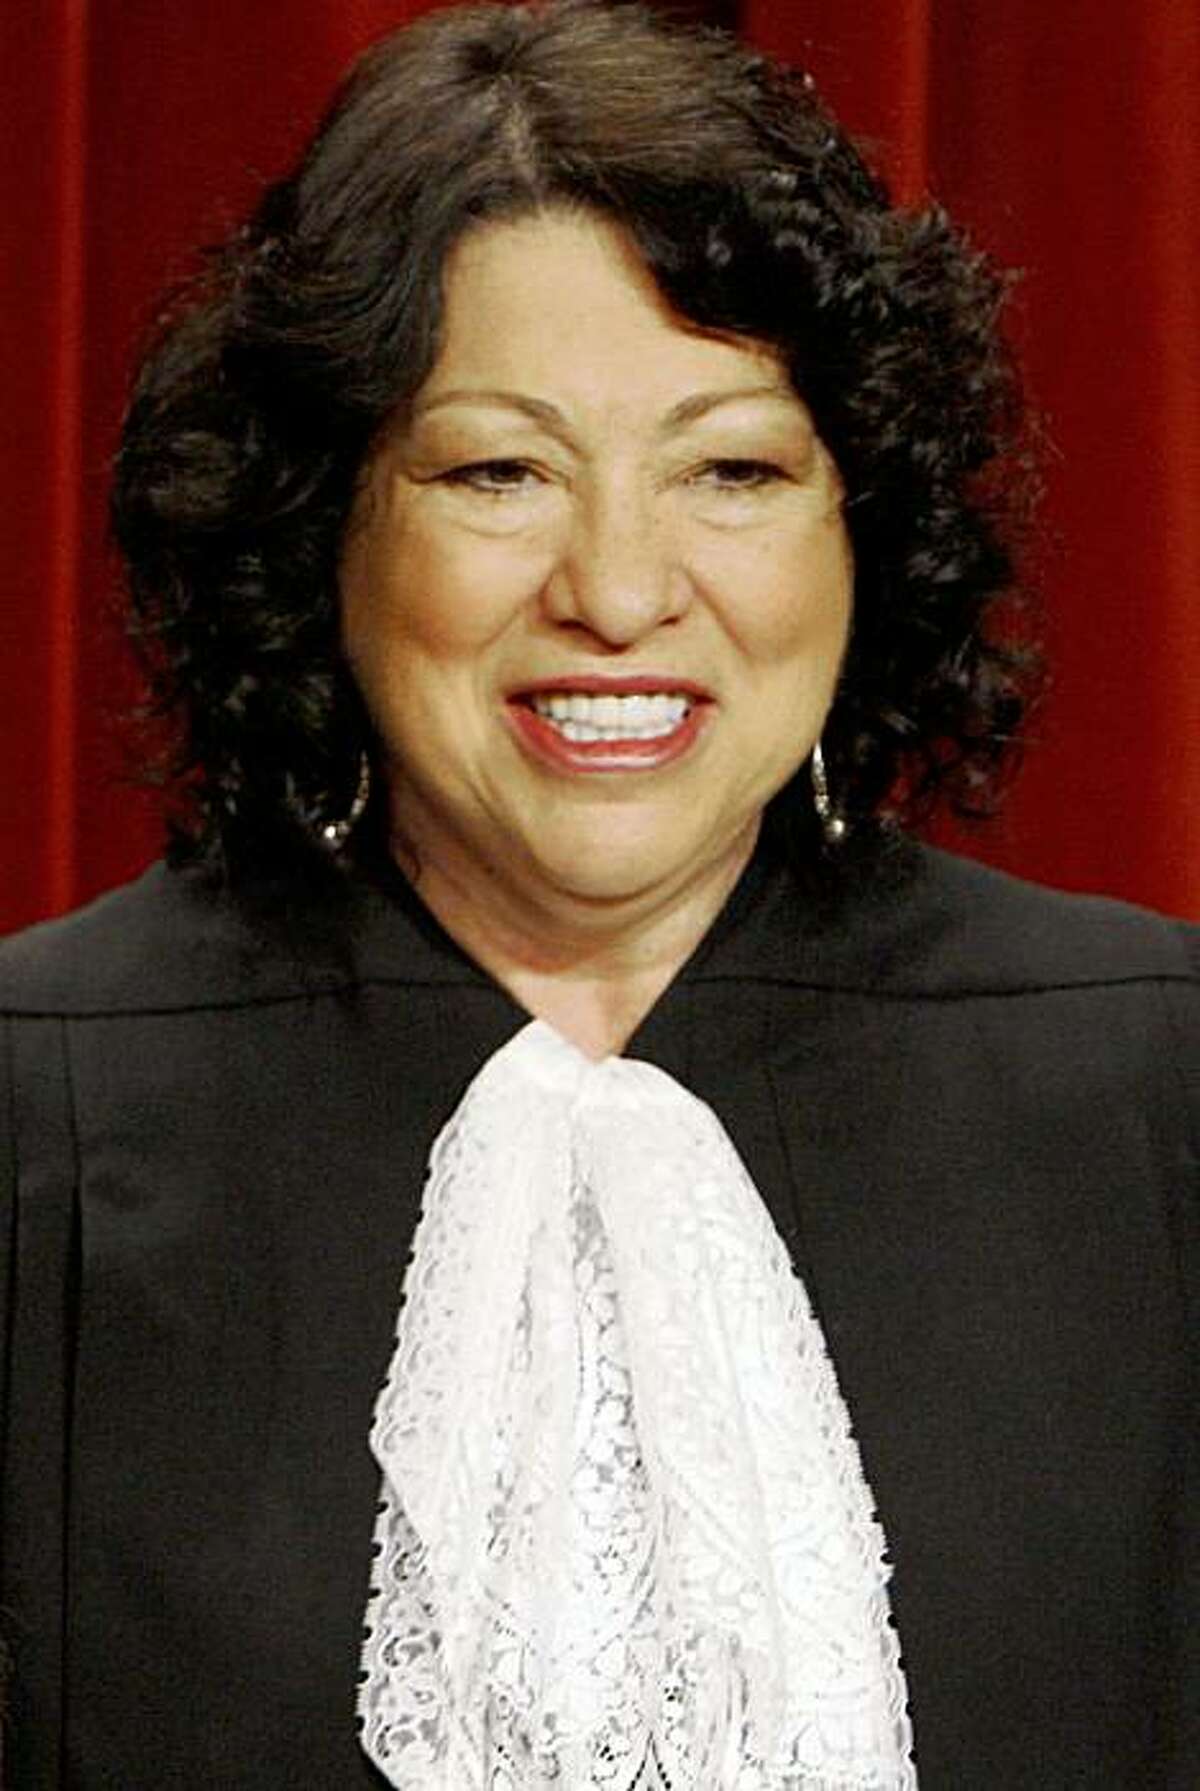 ** ADVANCE FOR SUNDAY, OCT. 4 AND THEREAFTER ** FILE - In this Sept. 29, 2009 file photo, the newest Supreme Court member, Justice Sonia Sotomayor, poses with her colleagues at the Supreme Court in Washington. (AP Photo/Charles Dharapak)